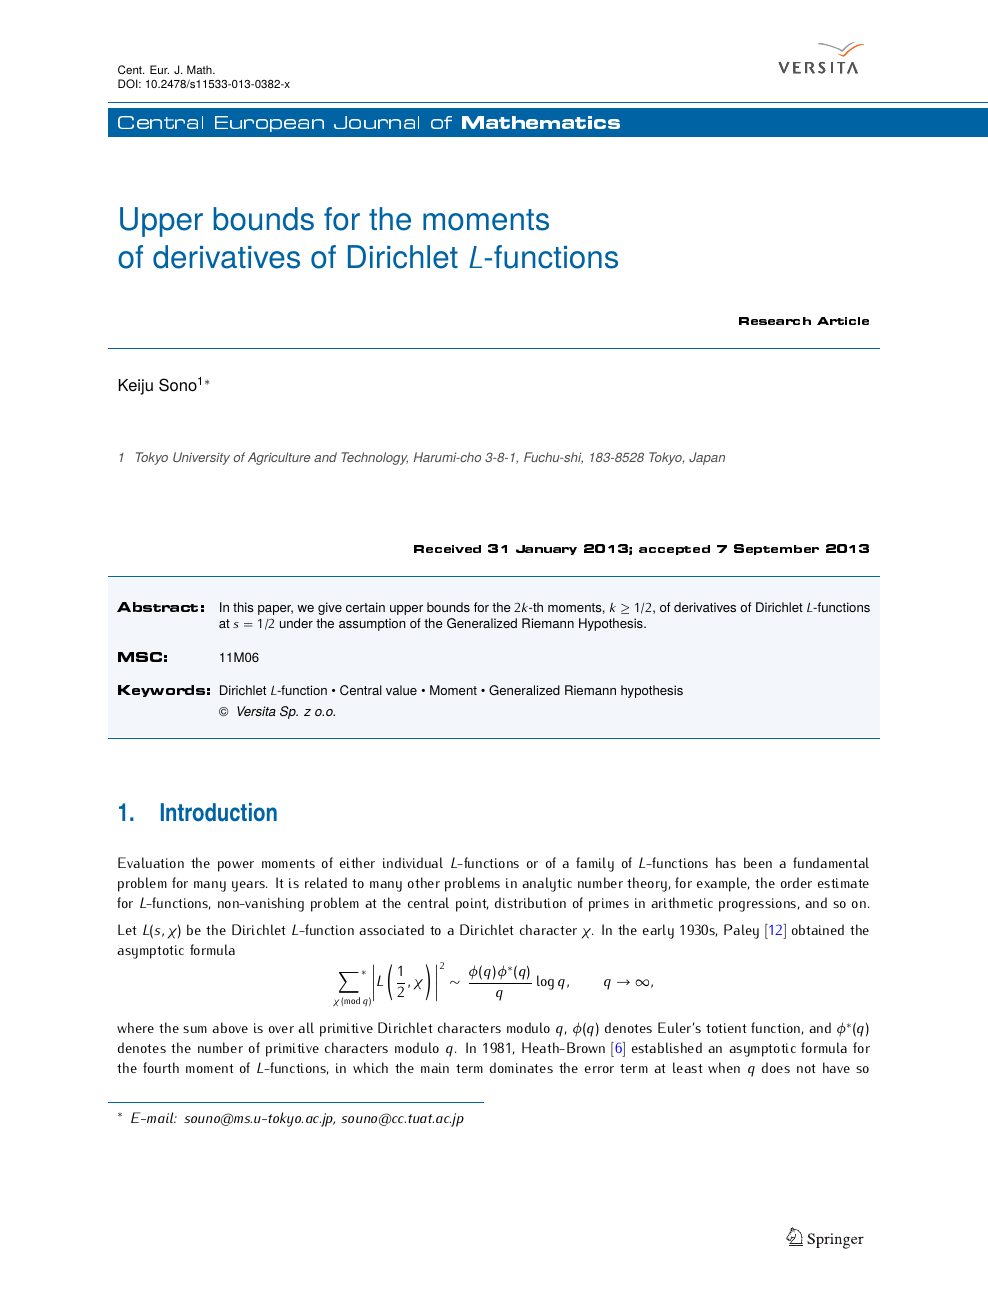 Upper Bounds For The Moments Of Derivatives Of Dirichlet L Functions Topic Of Research Paper In Mathematics Download Scholarly Article Pdf And Read For Free On Cyberleninka Open Science Hub